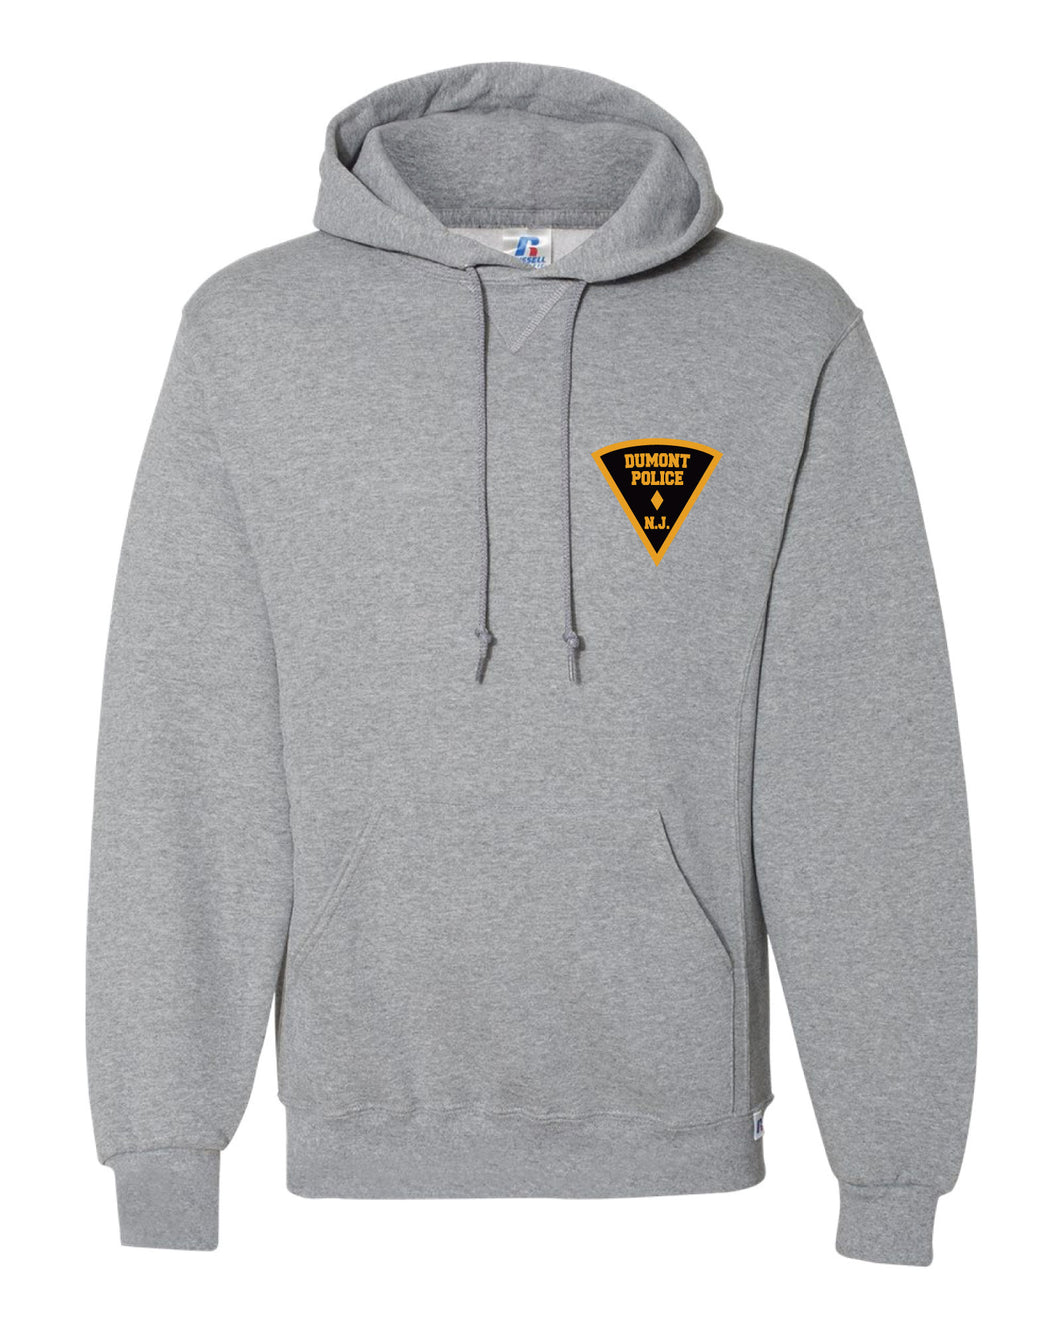 Dumont Police Russell Athletic Cotton Hoodie - Gray (Design 2) - 5KounT